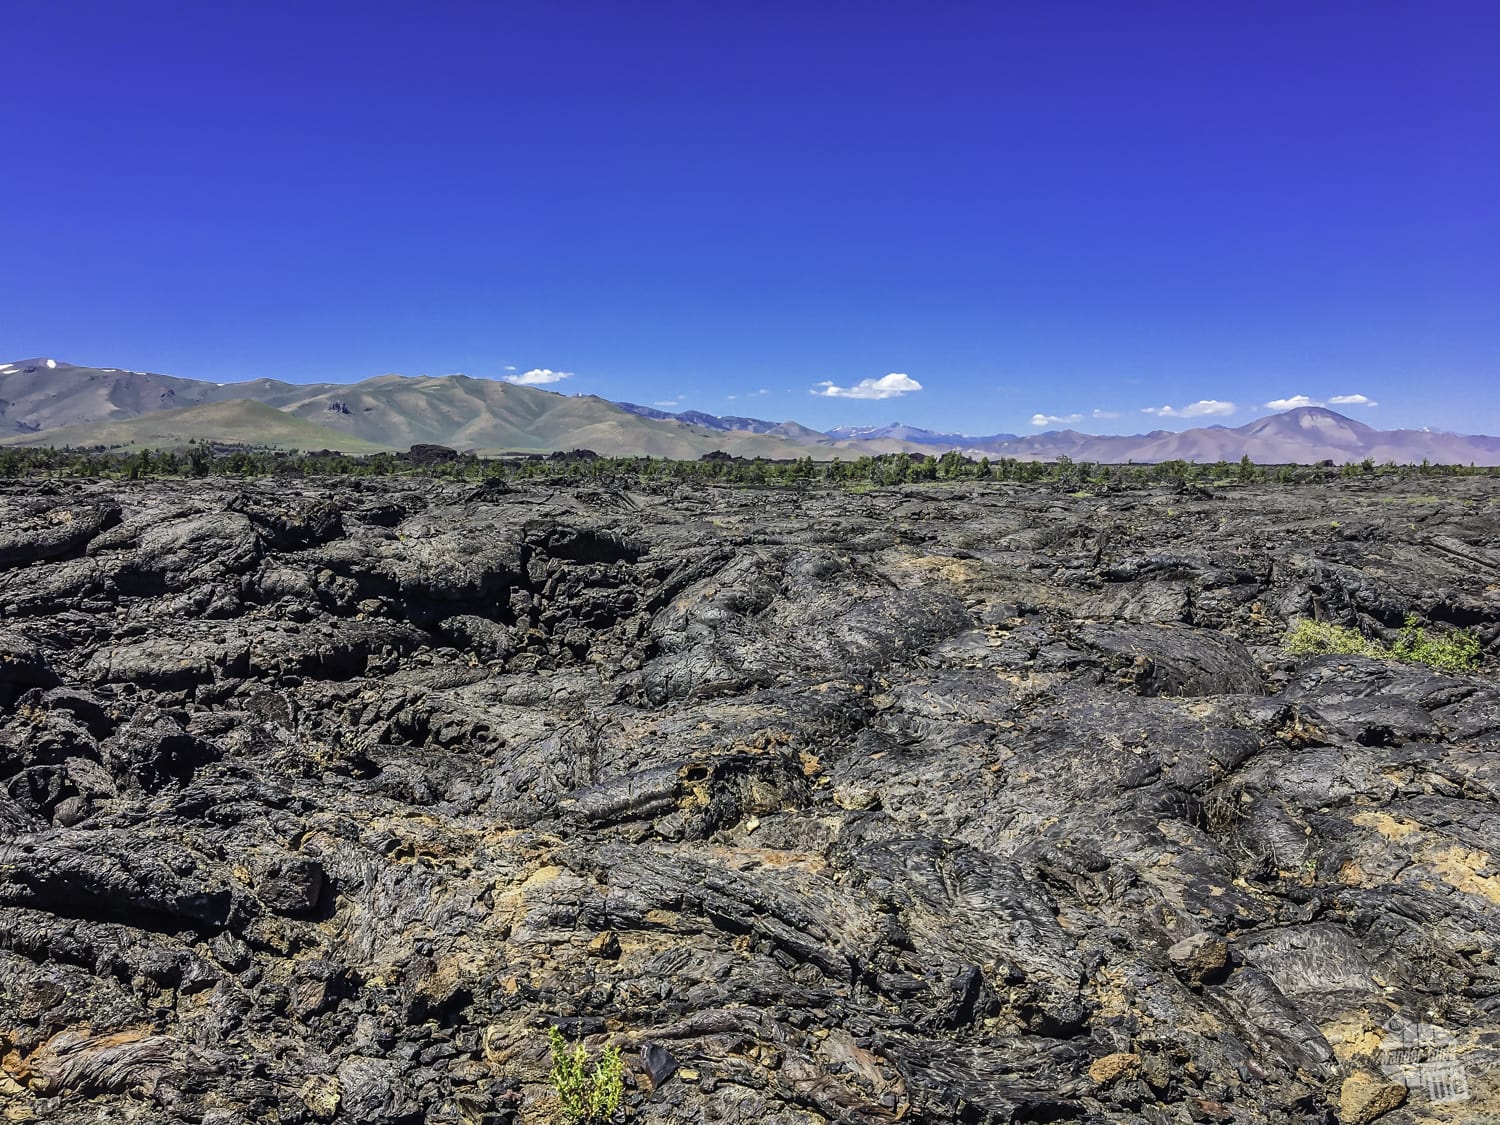 Lava fields at Craters of the Moon National Monument